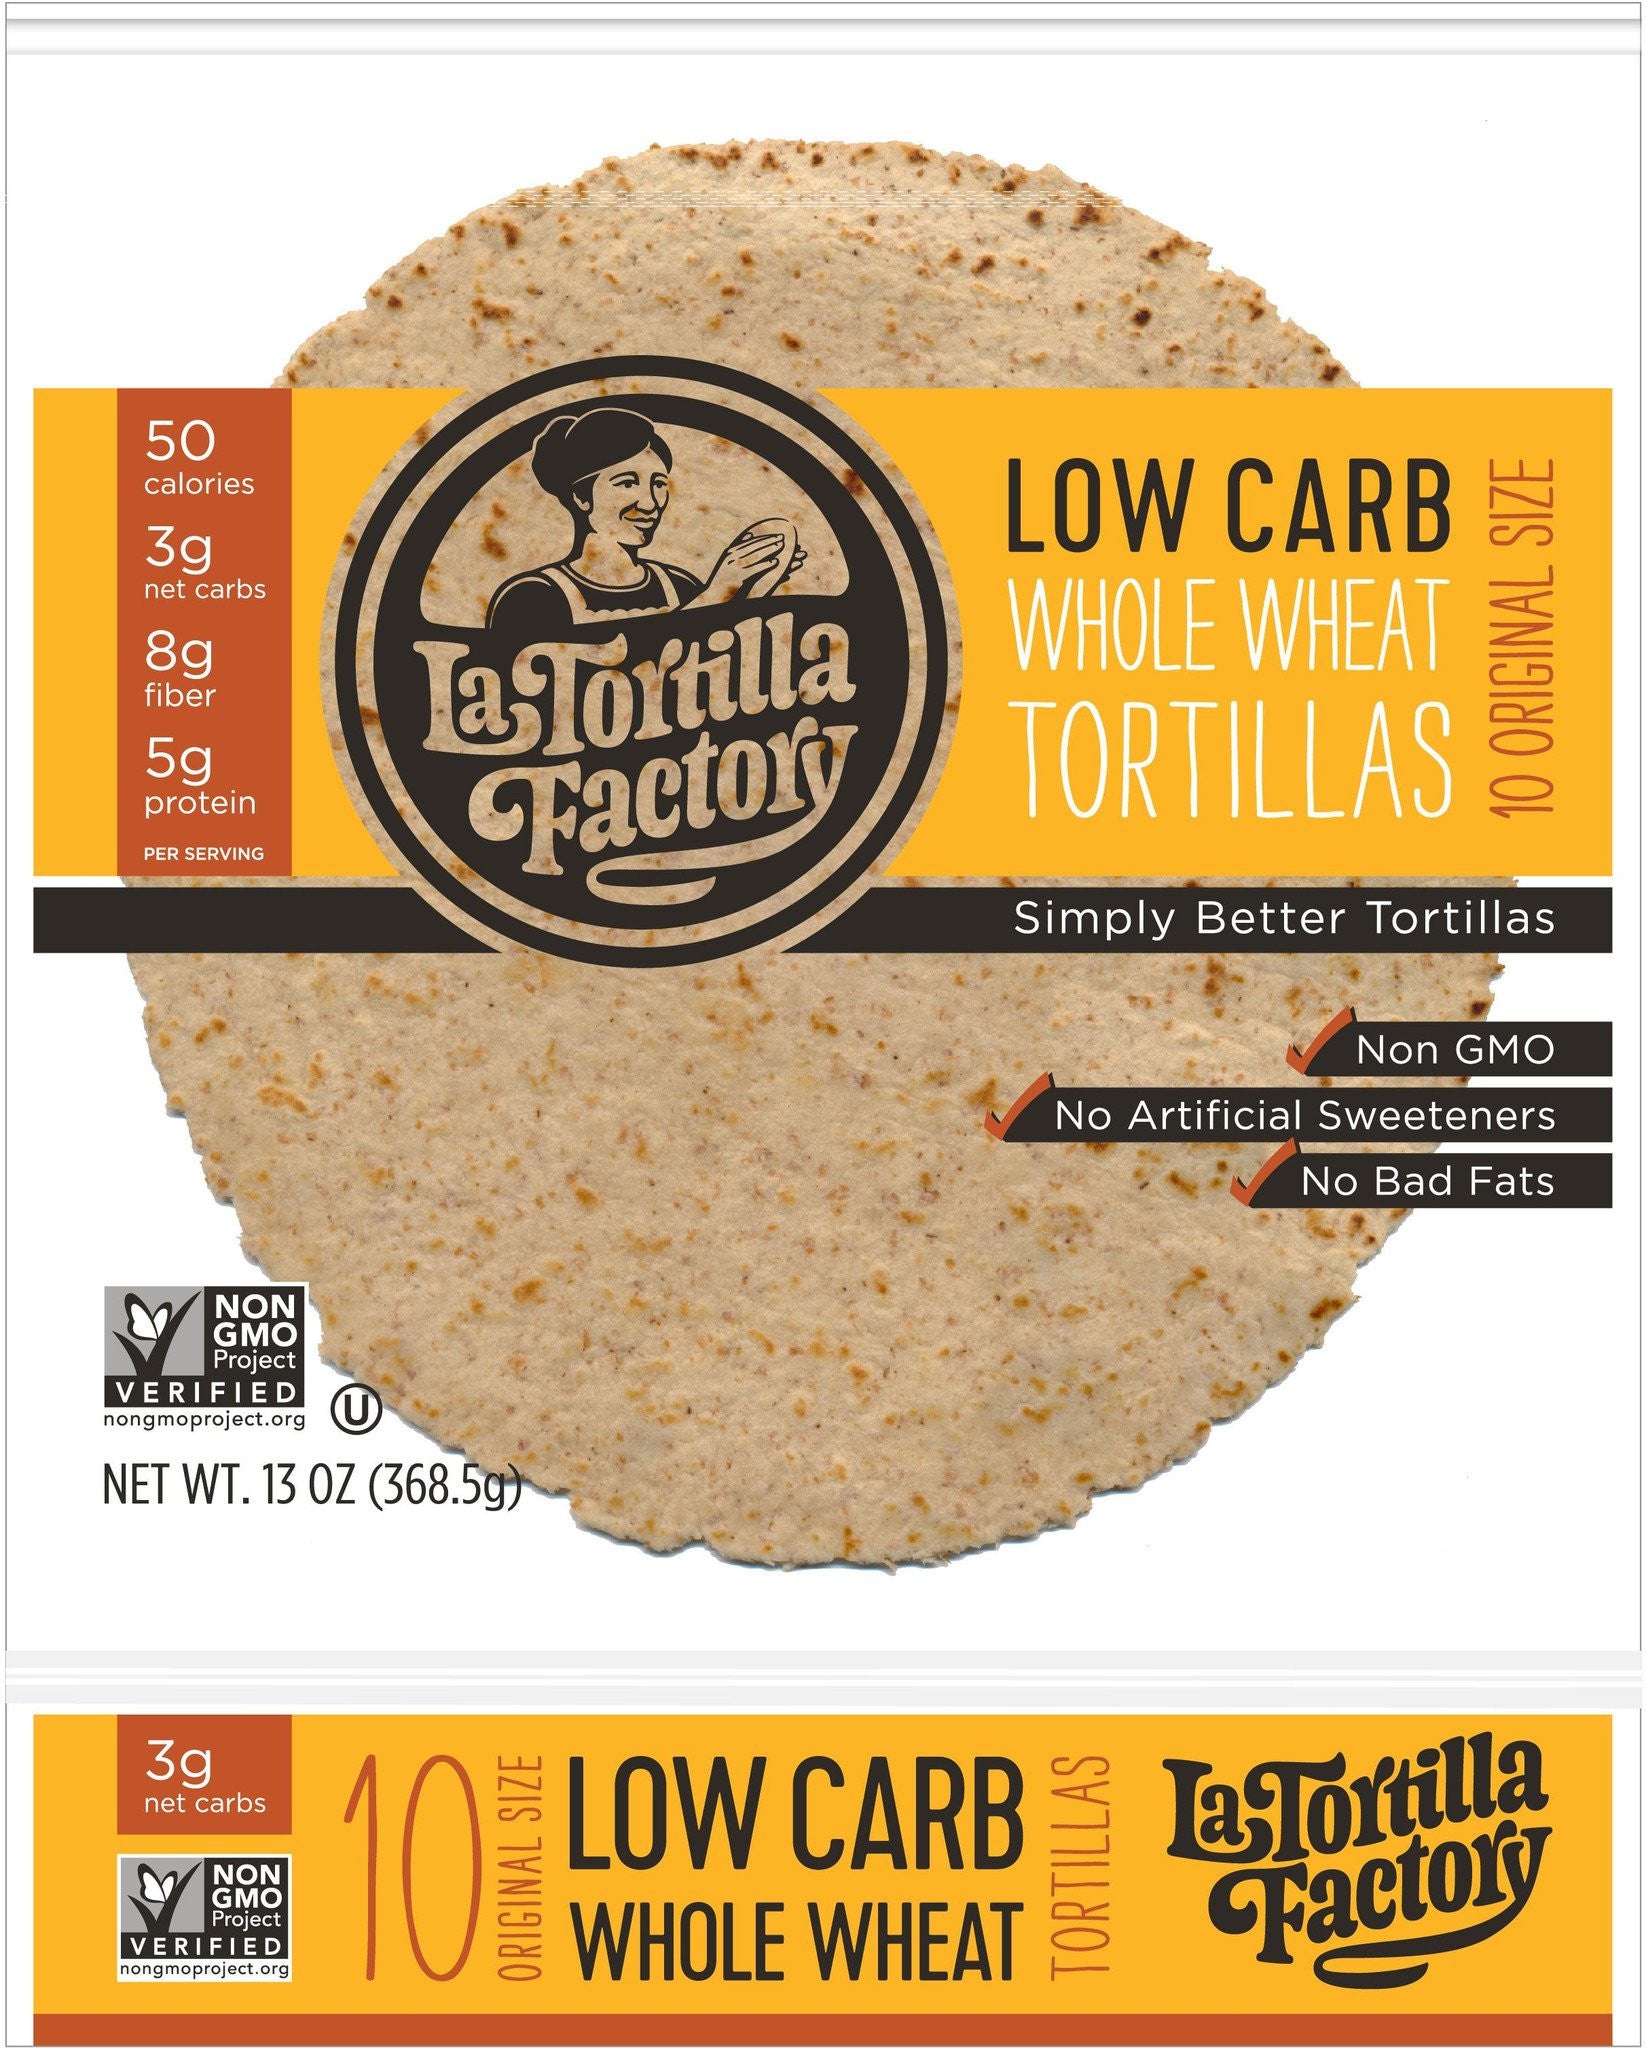 La Tortilla Factory Low Carb, High Fiber Tortillas, Made with Whole Wheat, Original Size, 10 Ea (Pack of 10)